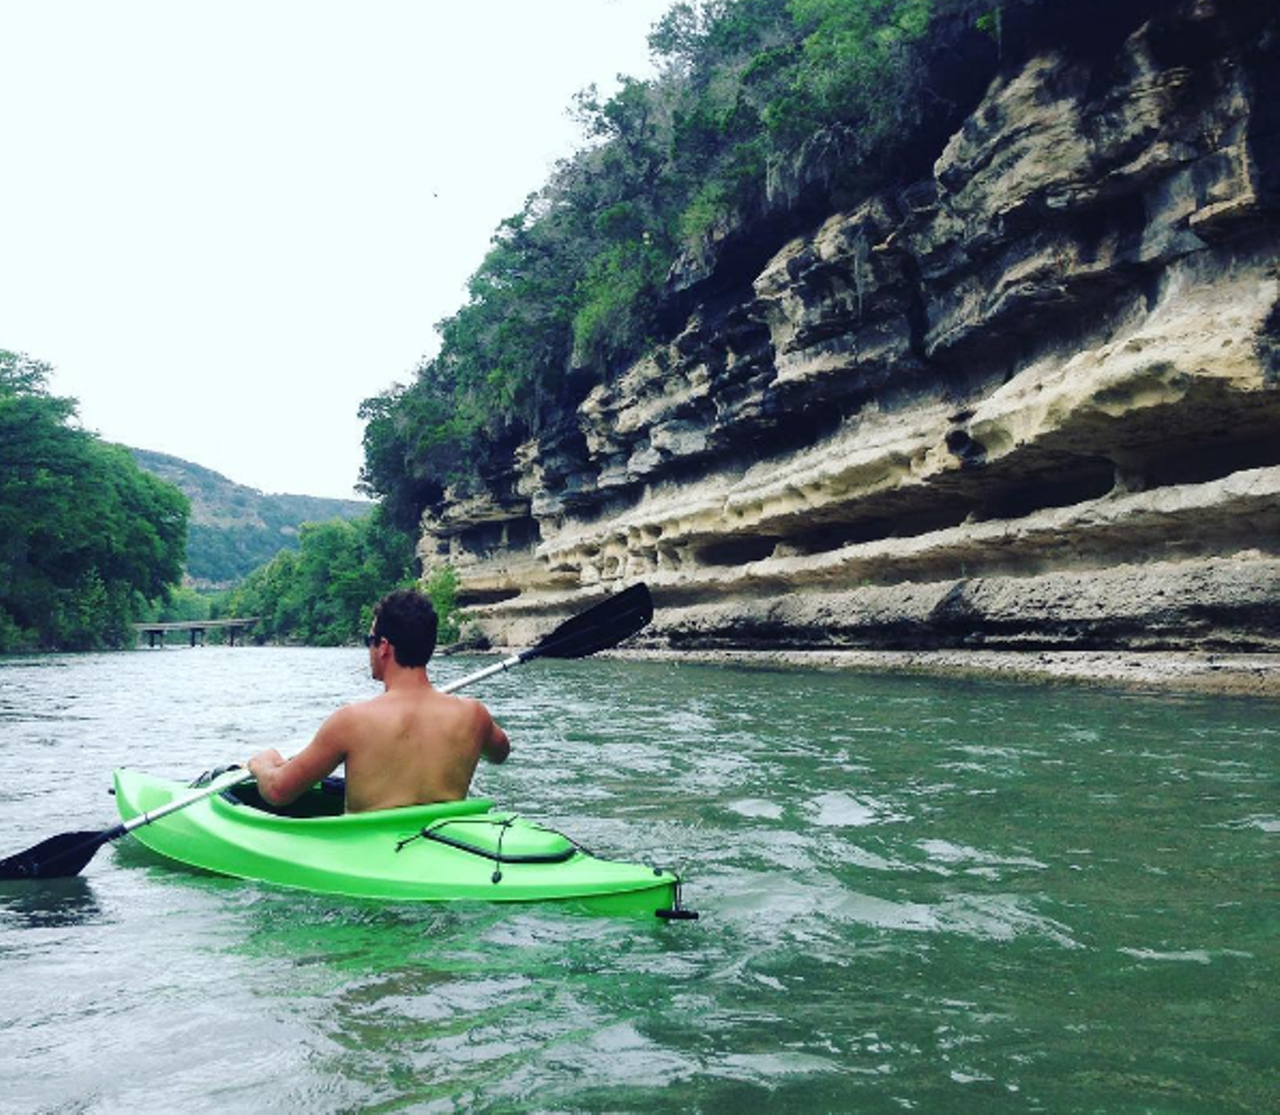 Guadalupe River
Stretching along 230 miles, you have options when it comes to kayaking in the Guadalupe River. We recommend checking out the Nichol's Landing Paddling Trail in Comal County  for a 10 mile route. 
Photo via Instagram (chelsea_miller_)